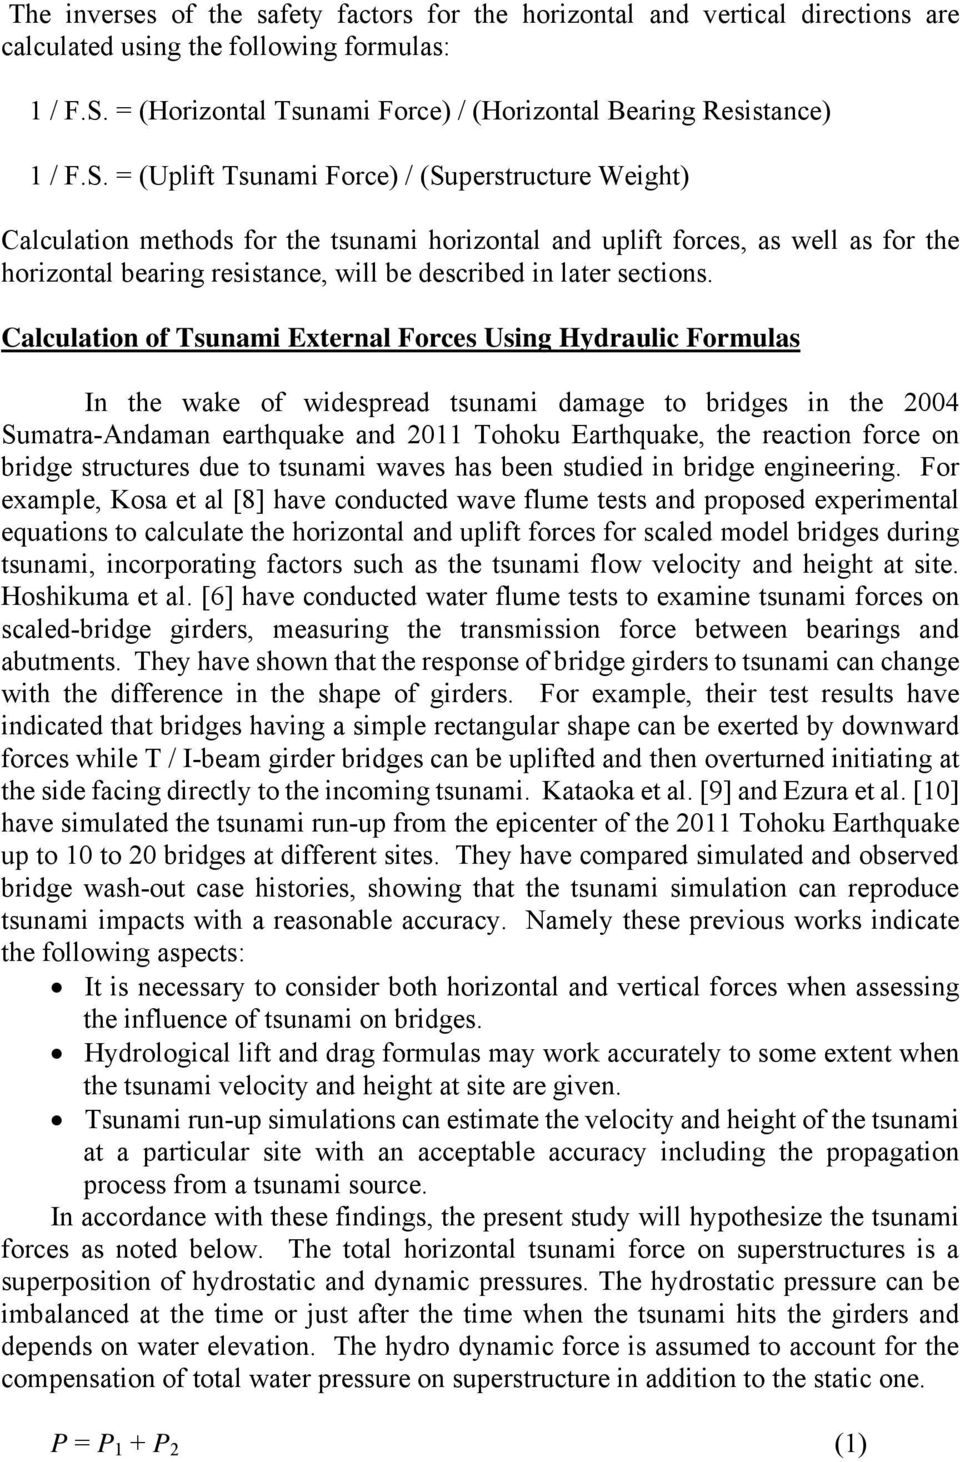 = (Uplift Tsunami Force) / (Superstructure Weight) Calculation methods for the tsunami horizontal and uplift forces, as well as for the horizontal bearing resistance, will be described in later